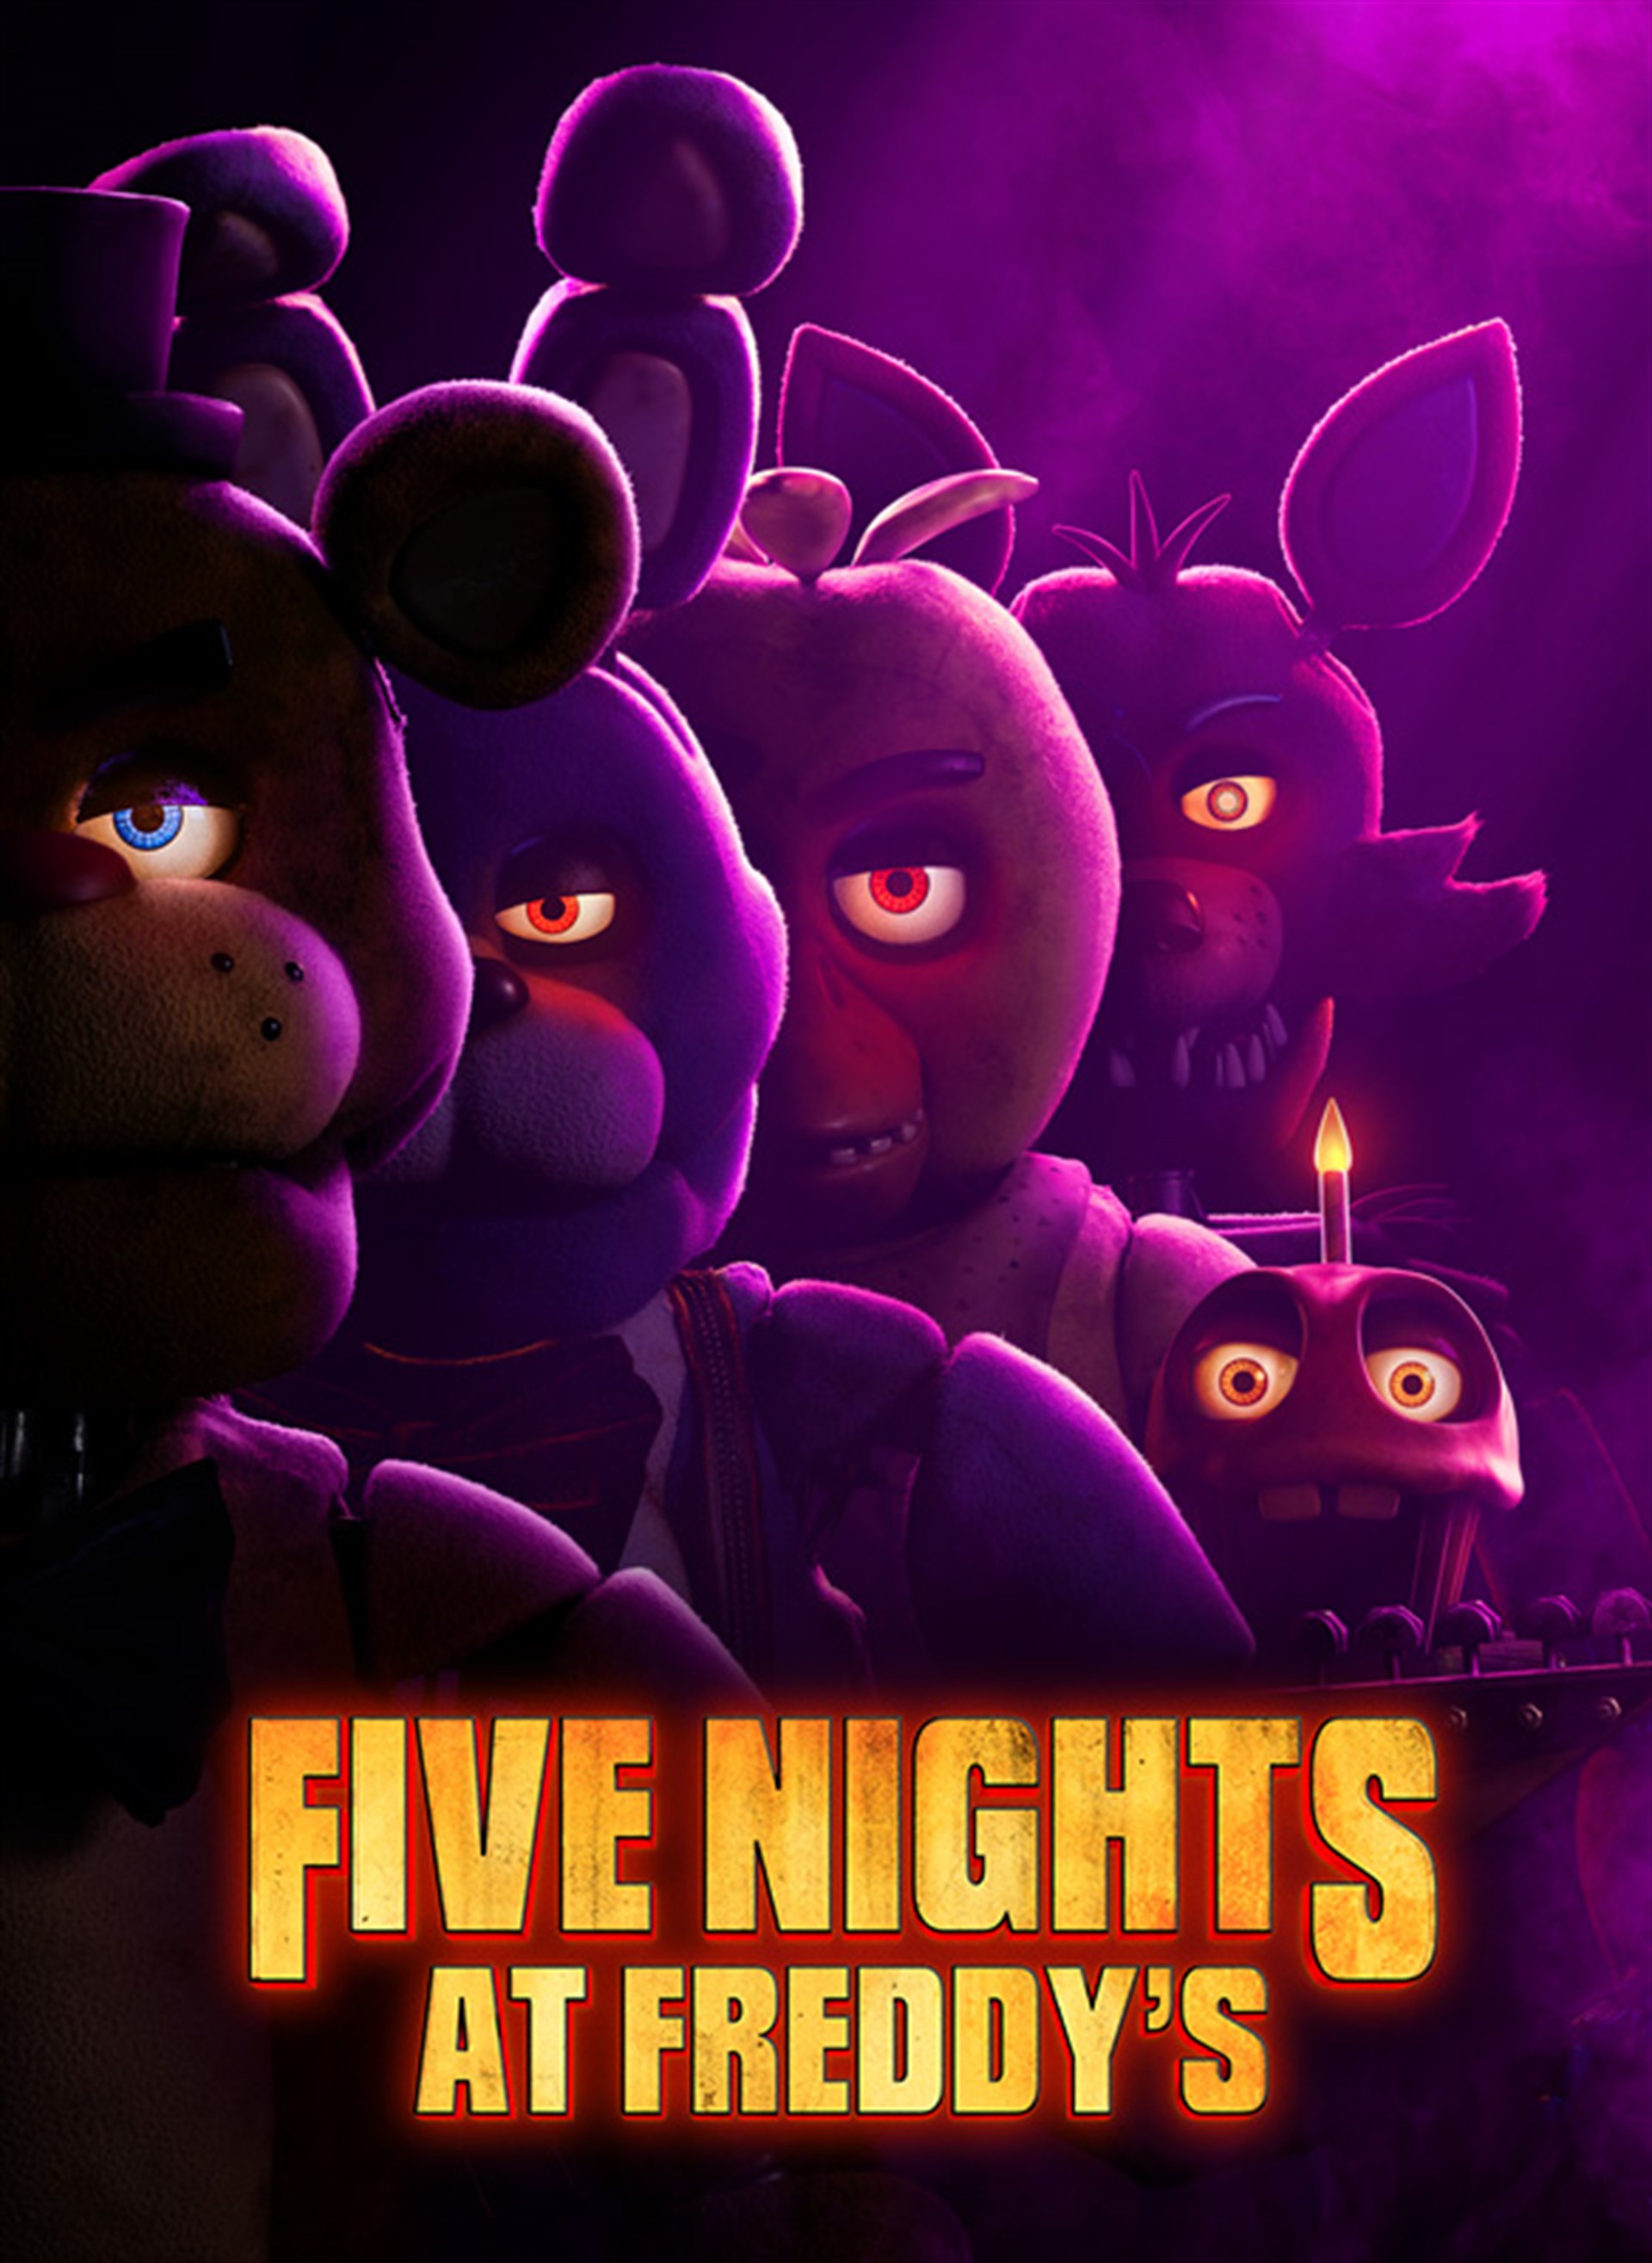 bobby carlin add pichers of five nights at freddys photo